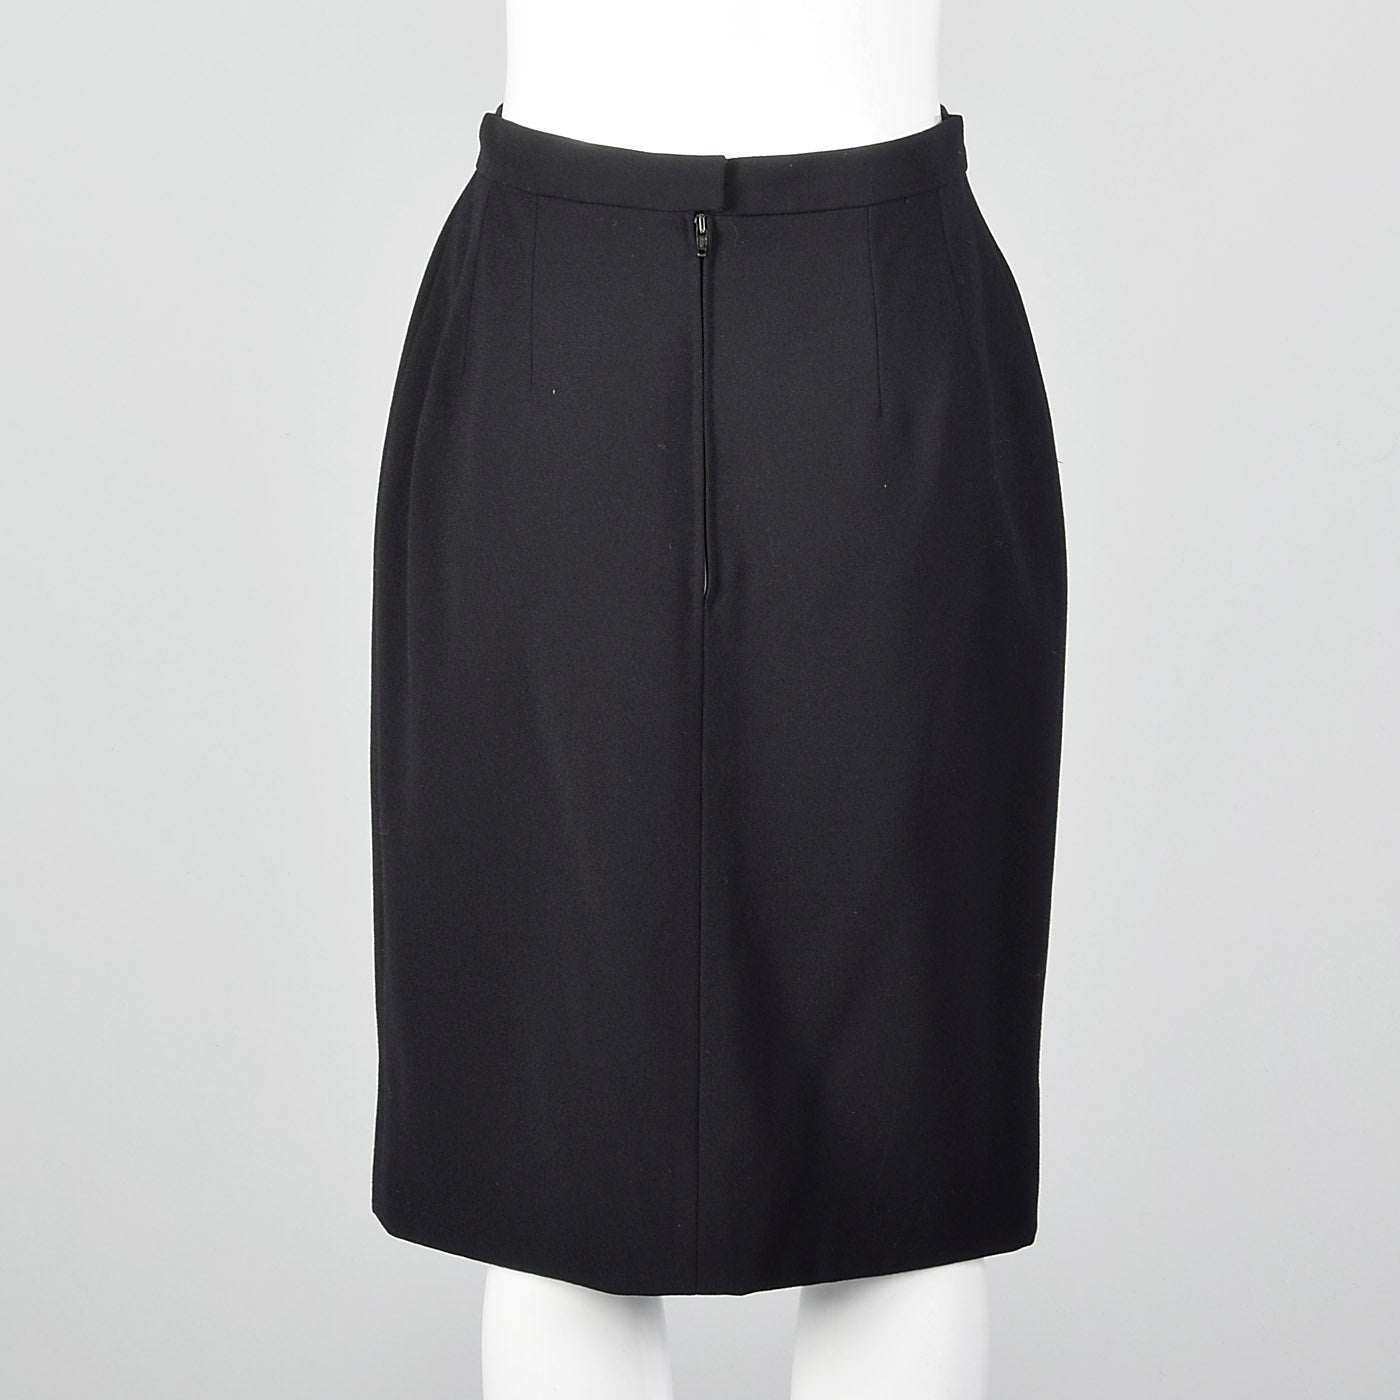 1990s Chanel Boutique Black Wool Pencil Skirt